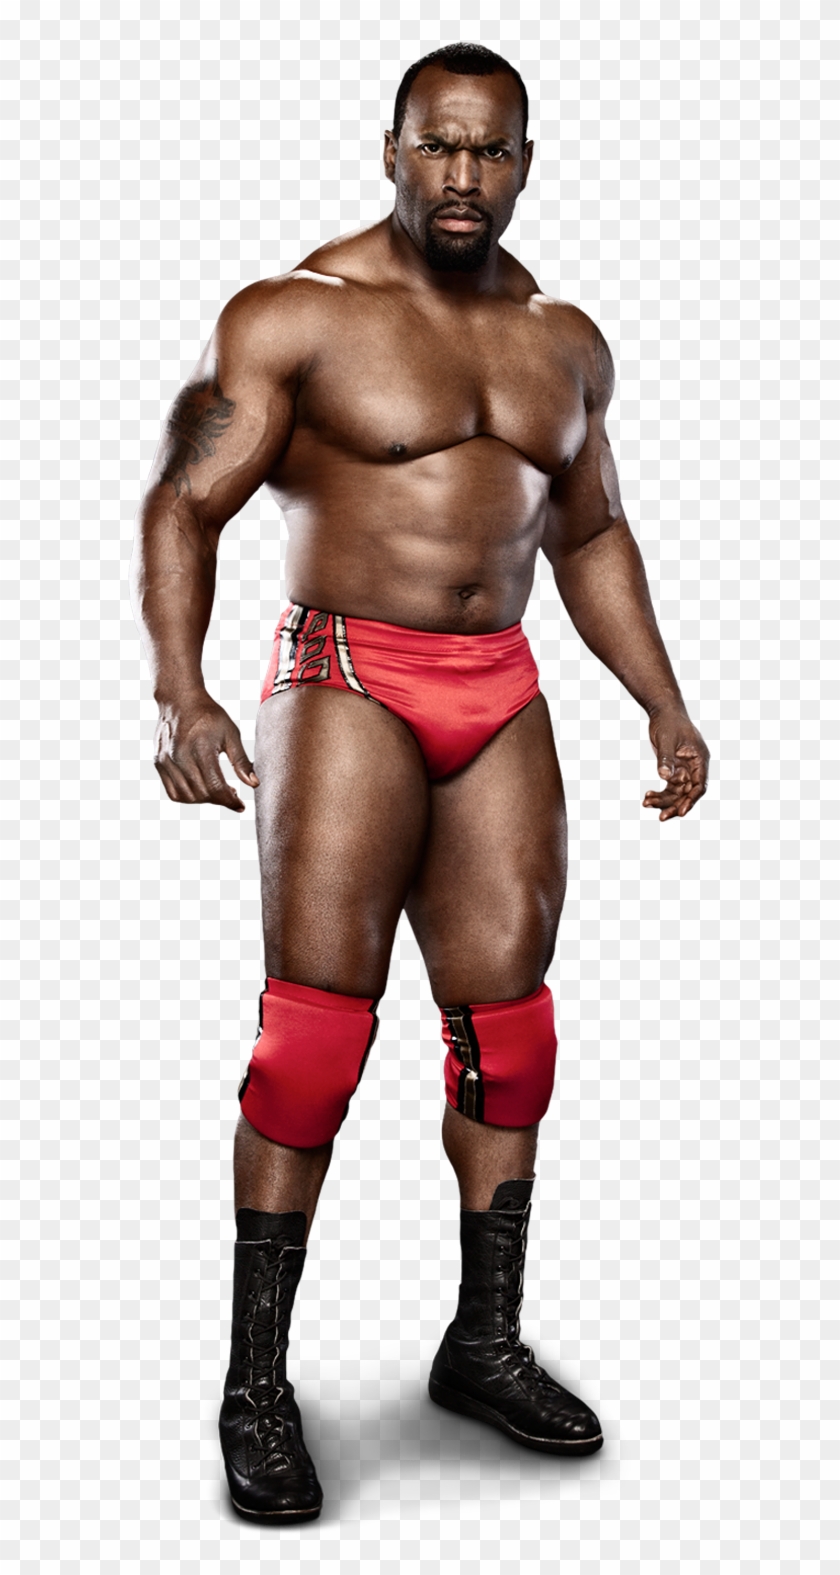 Most Underrated Big Guys In The Wwe In The Last 15 - Wwe Ezekiel Jackson Png Clipart